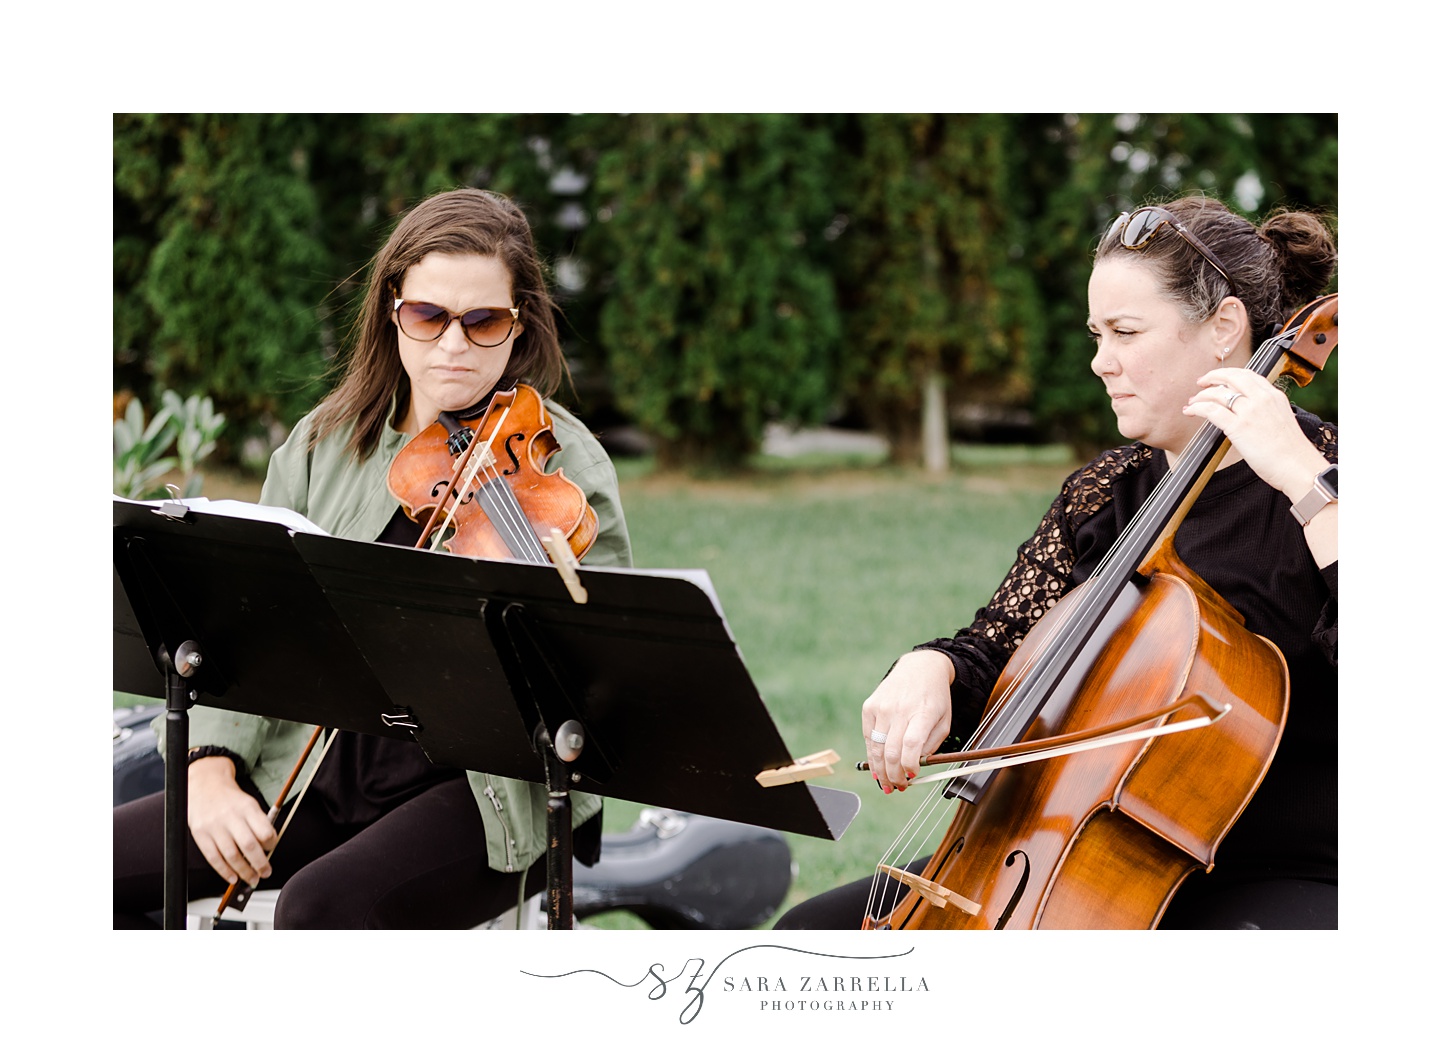 strings duo performs during outdoor wedding ceremony at the Atlantic Wyndham Resort